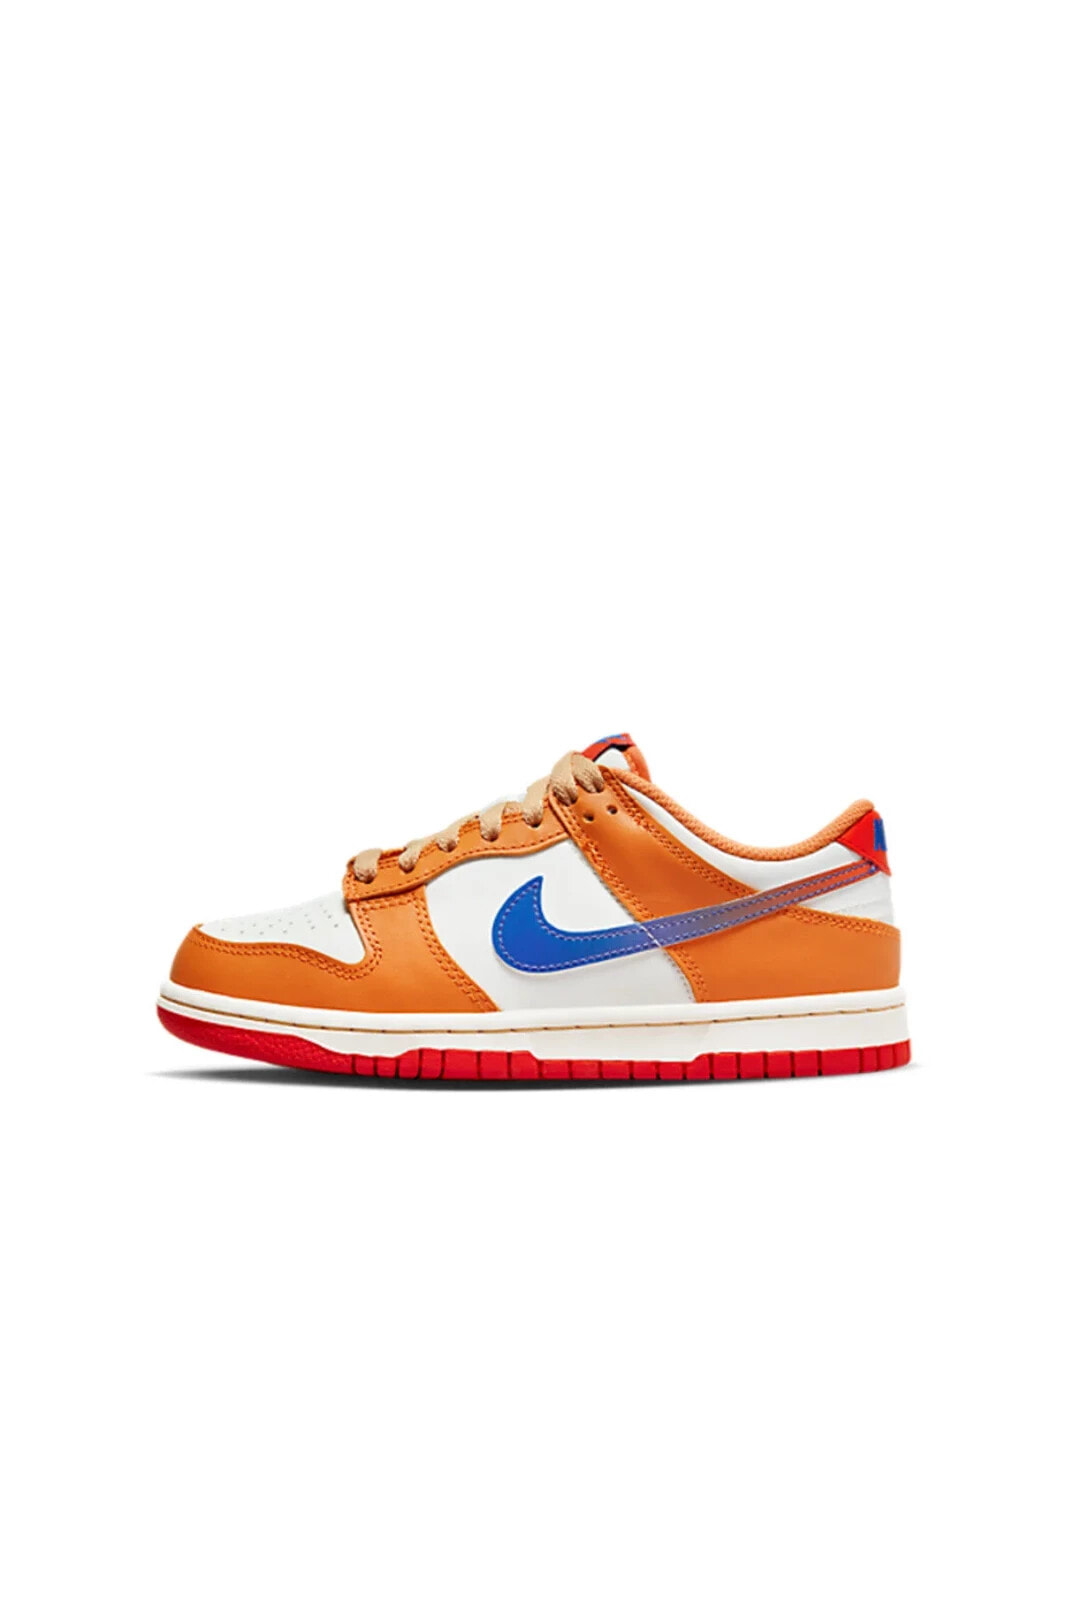 Dunk Low Hot Curry Game Royal (GS) | -DH9765-101